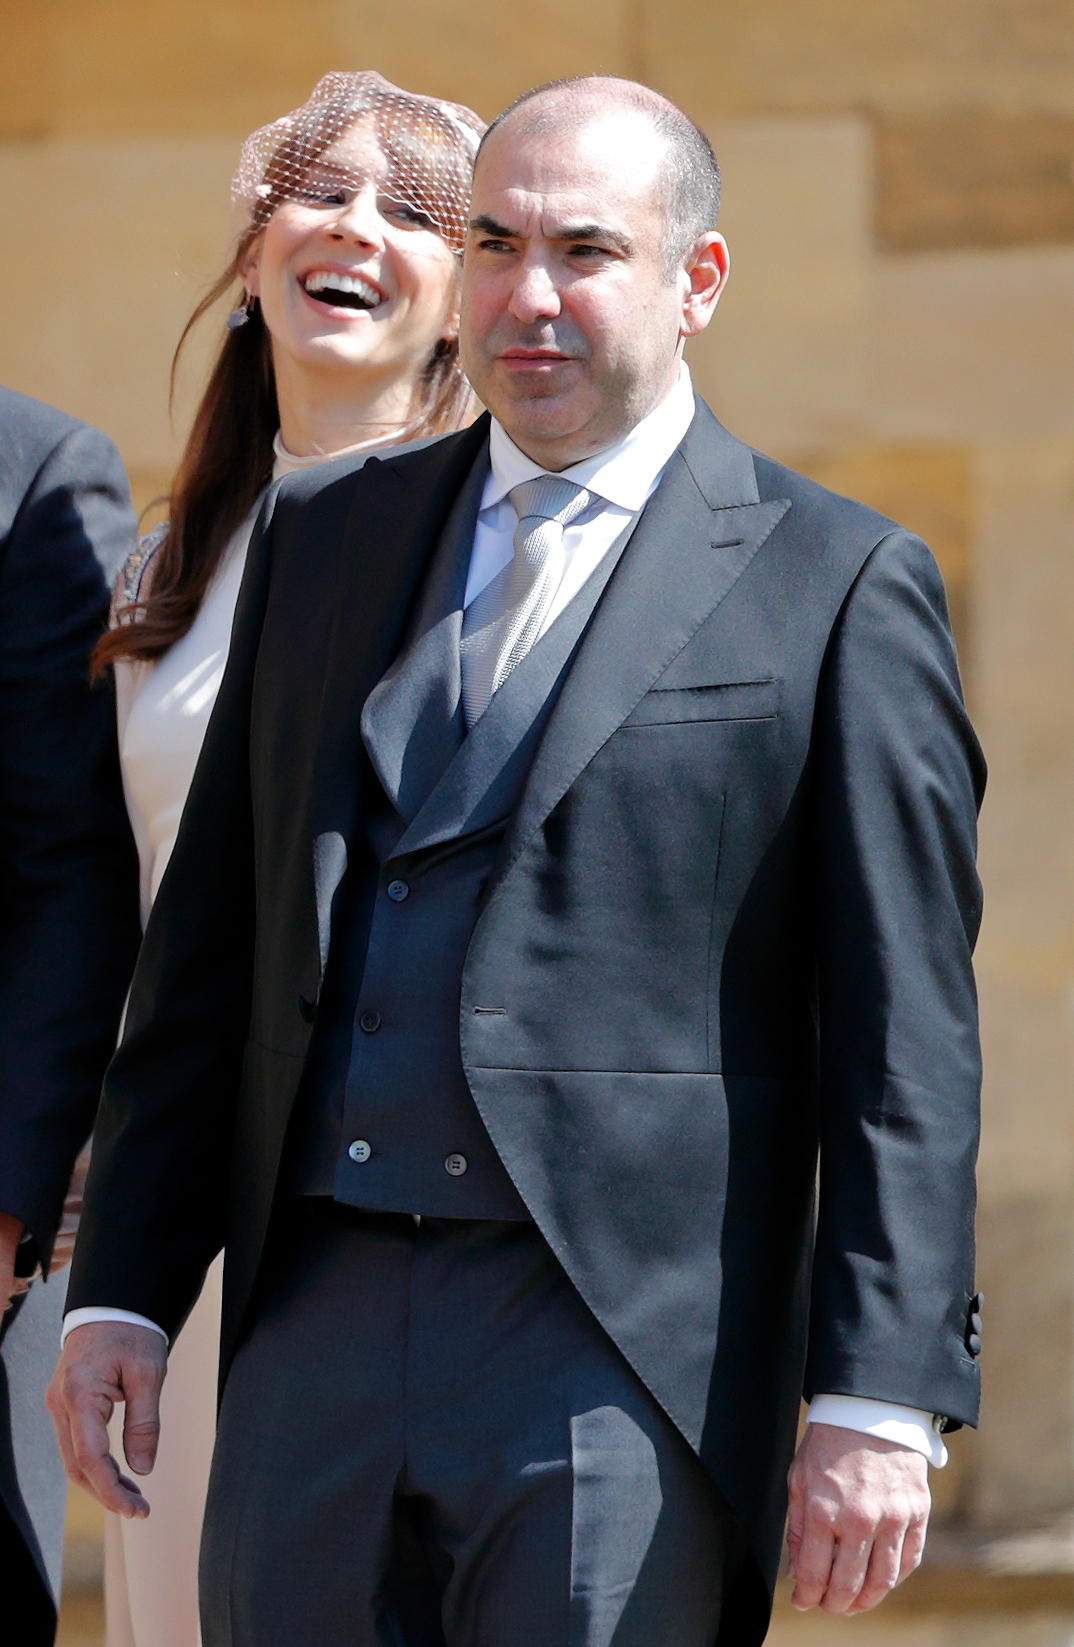 Rick Hoffman attends the wedding of Prince Harry to Meghan Markle at St George's Chapel, Windsor Castle, in Windsor, England, on May 19, 2018. | Source: Getty Images